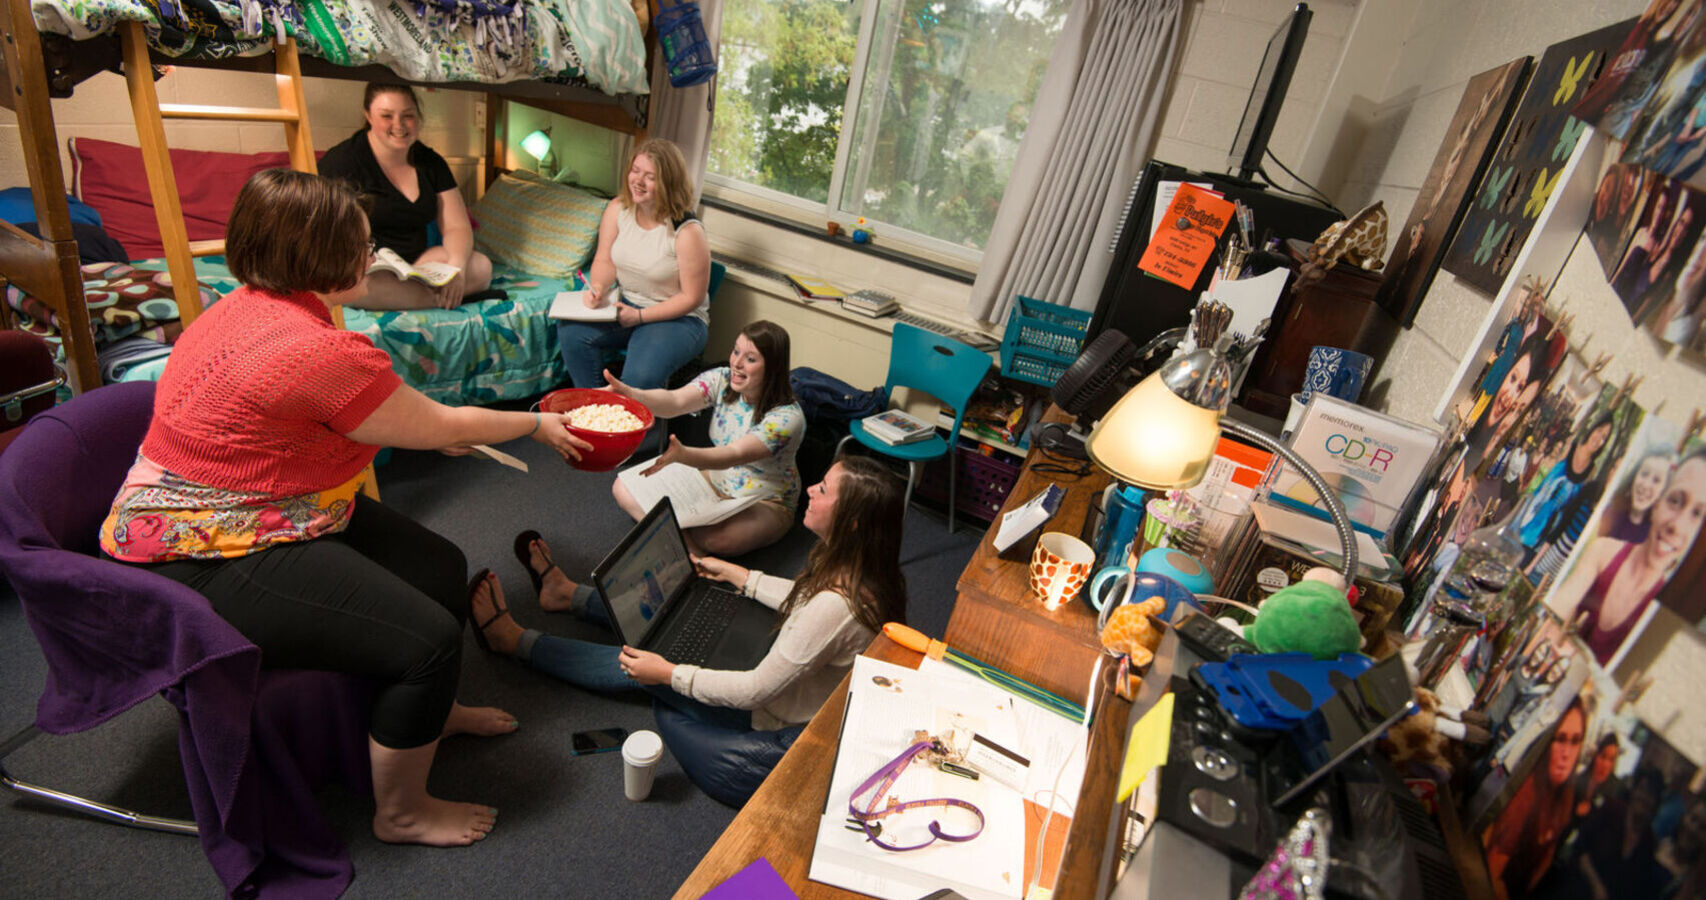 A group of students hang out in a dorm room